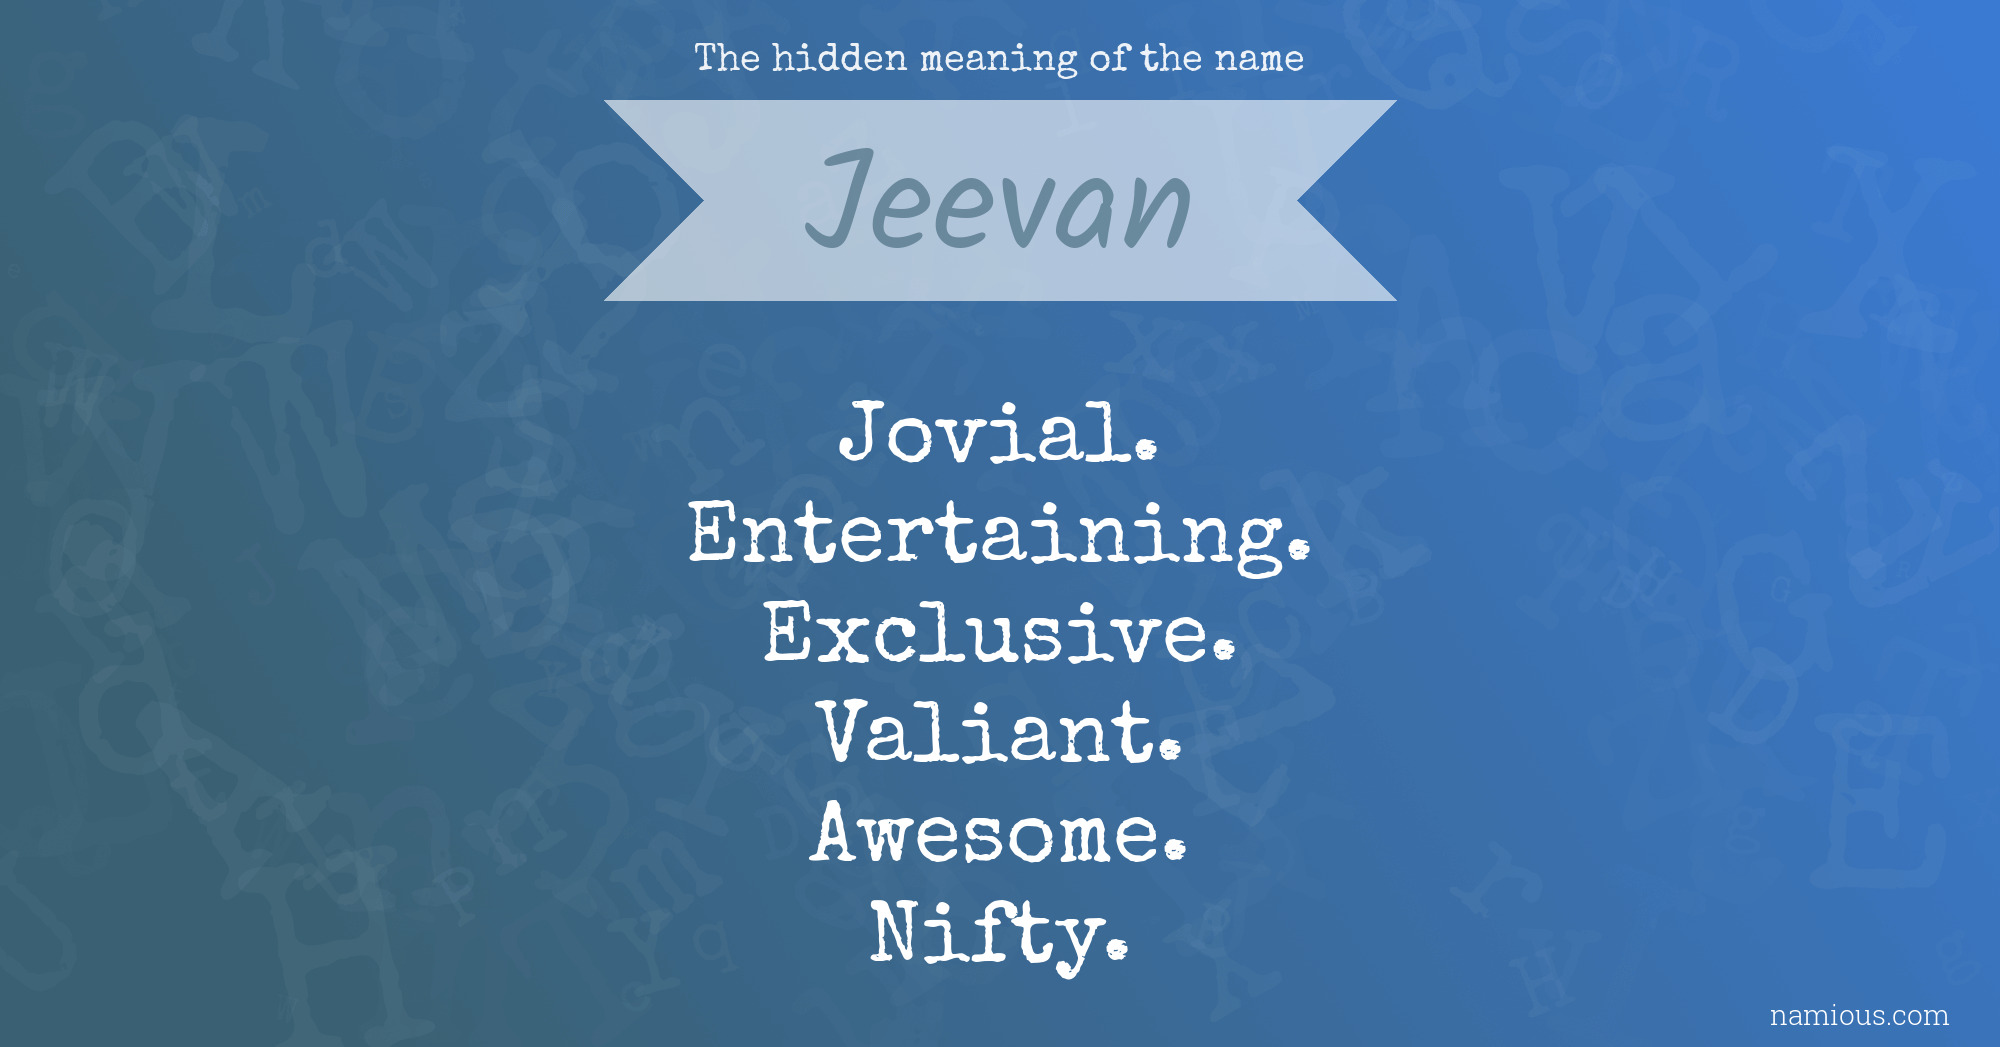 The hidden meaning of the name Jeevan